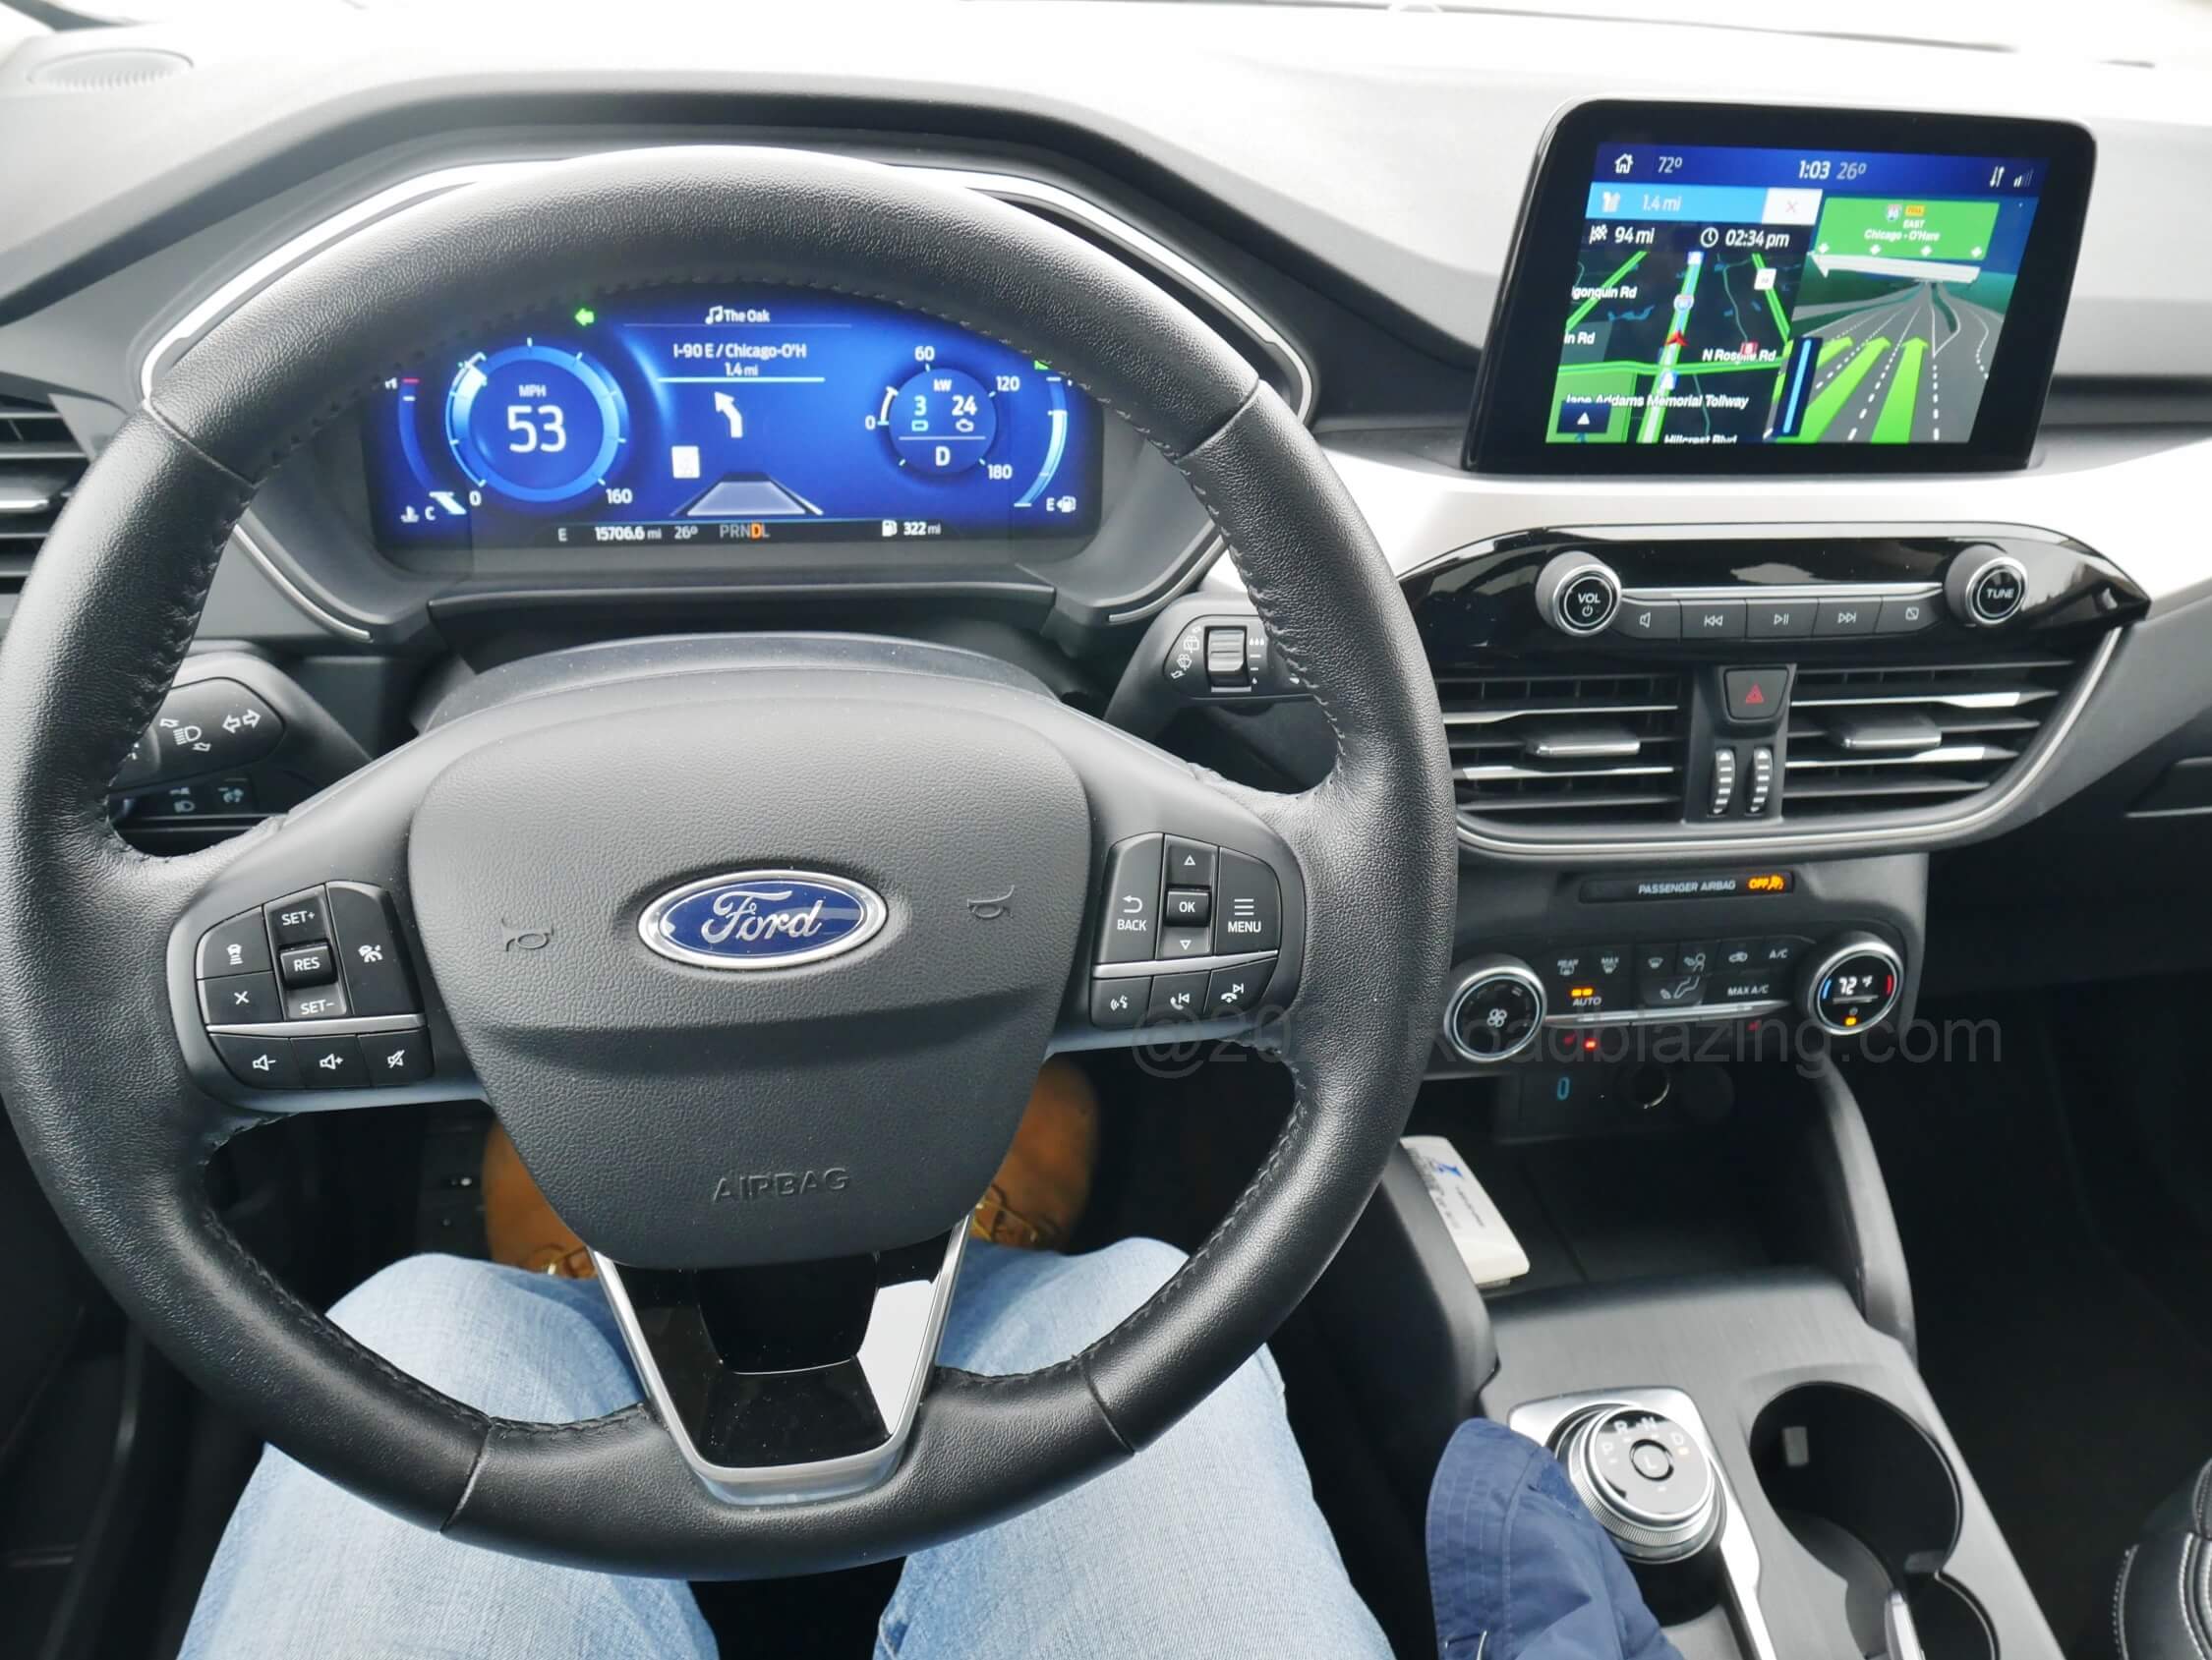 2020 Ford Escape SE Hybrid AWD: cockpit while driving w/ native Navigation displayed on 8.0" split pane touch LCD screen